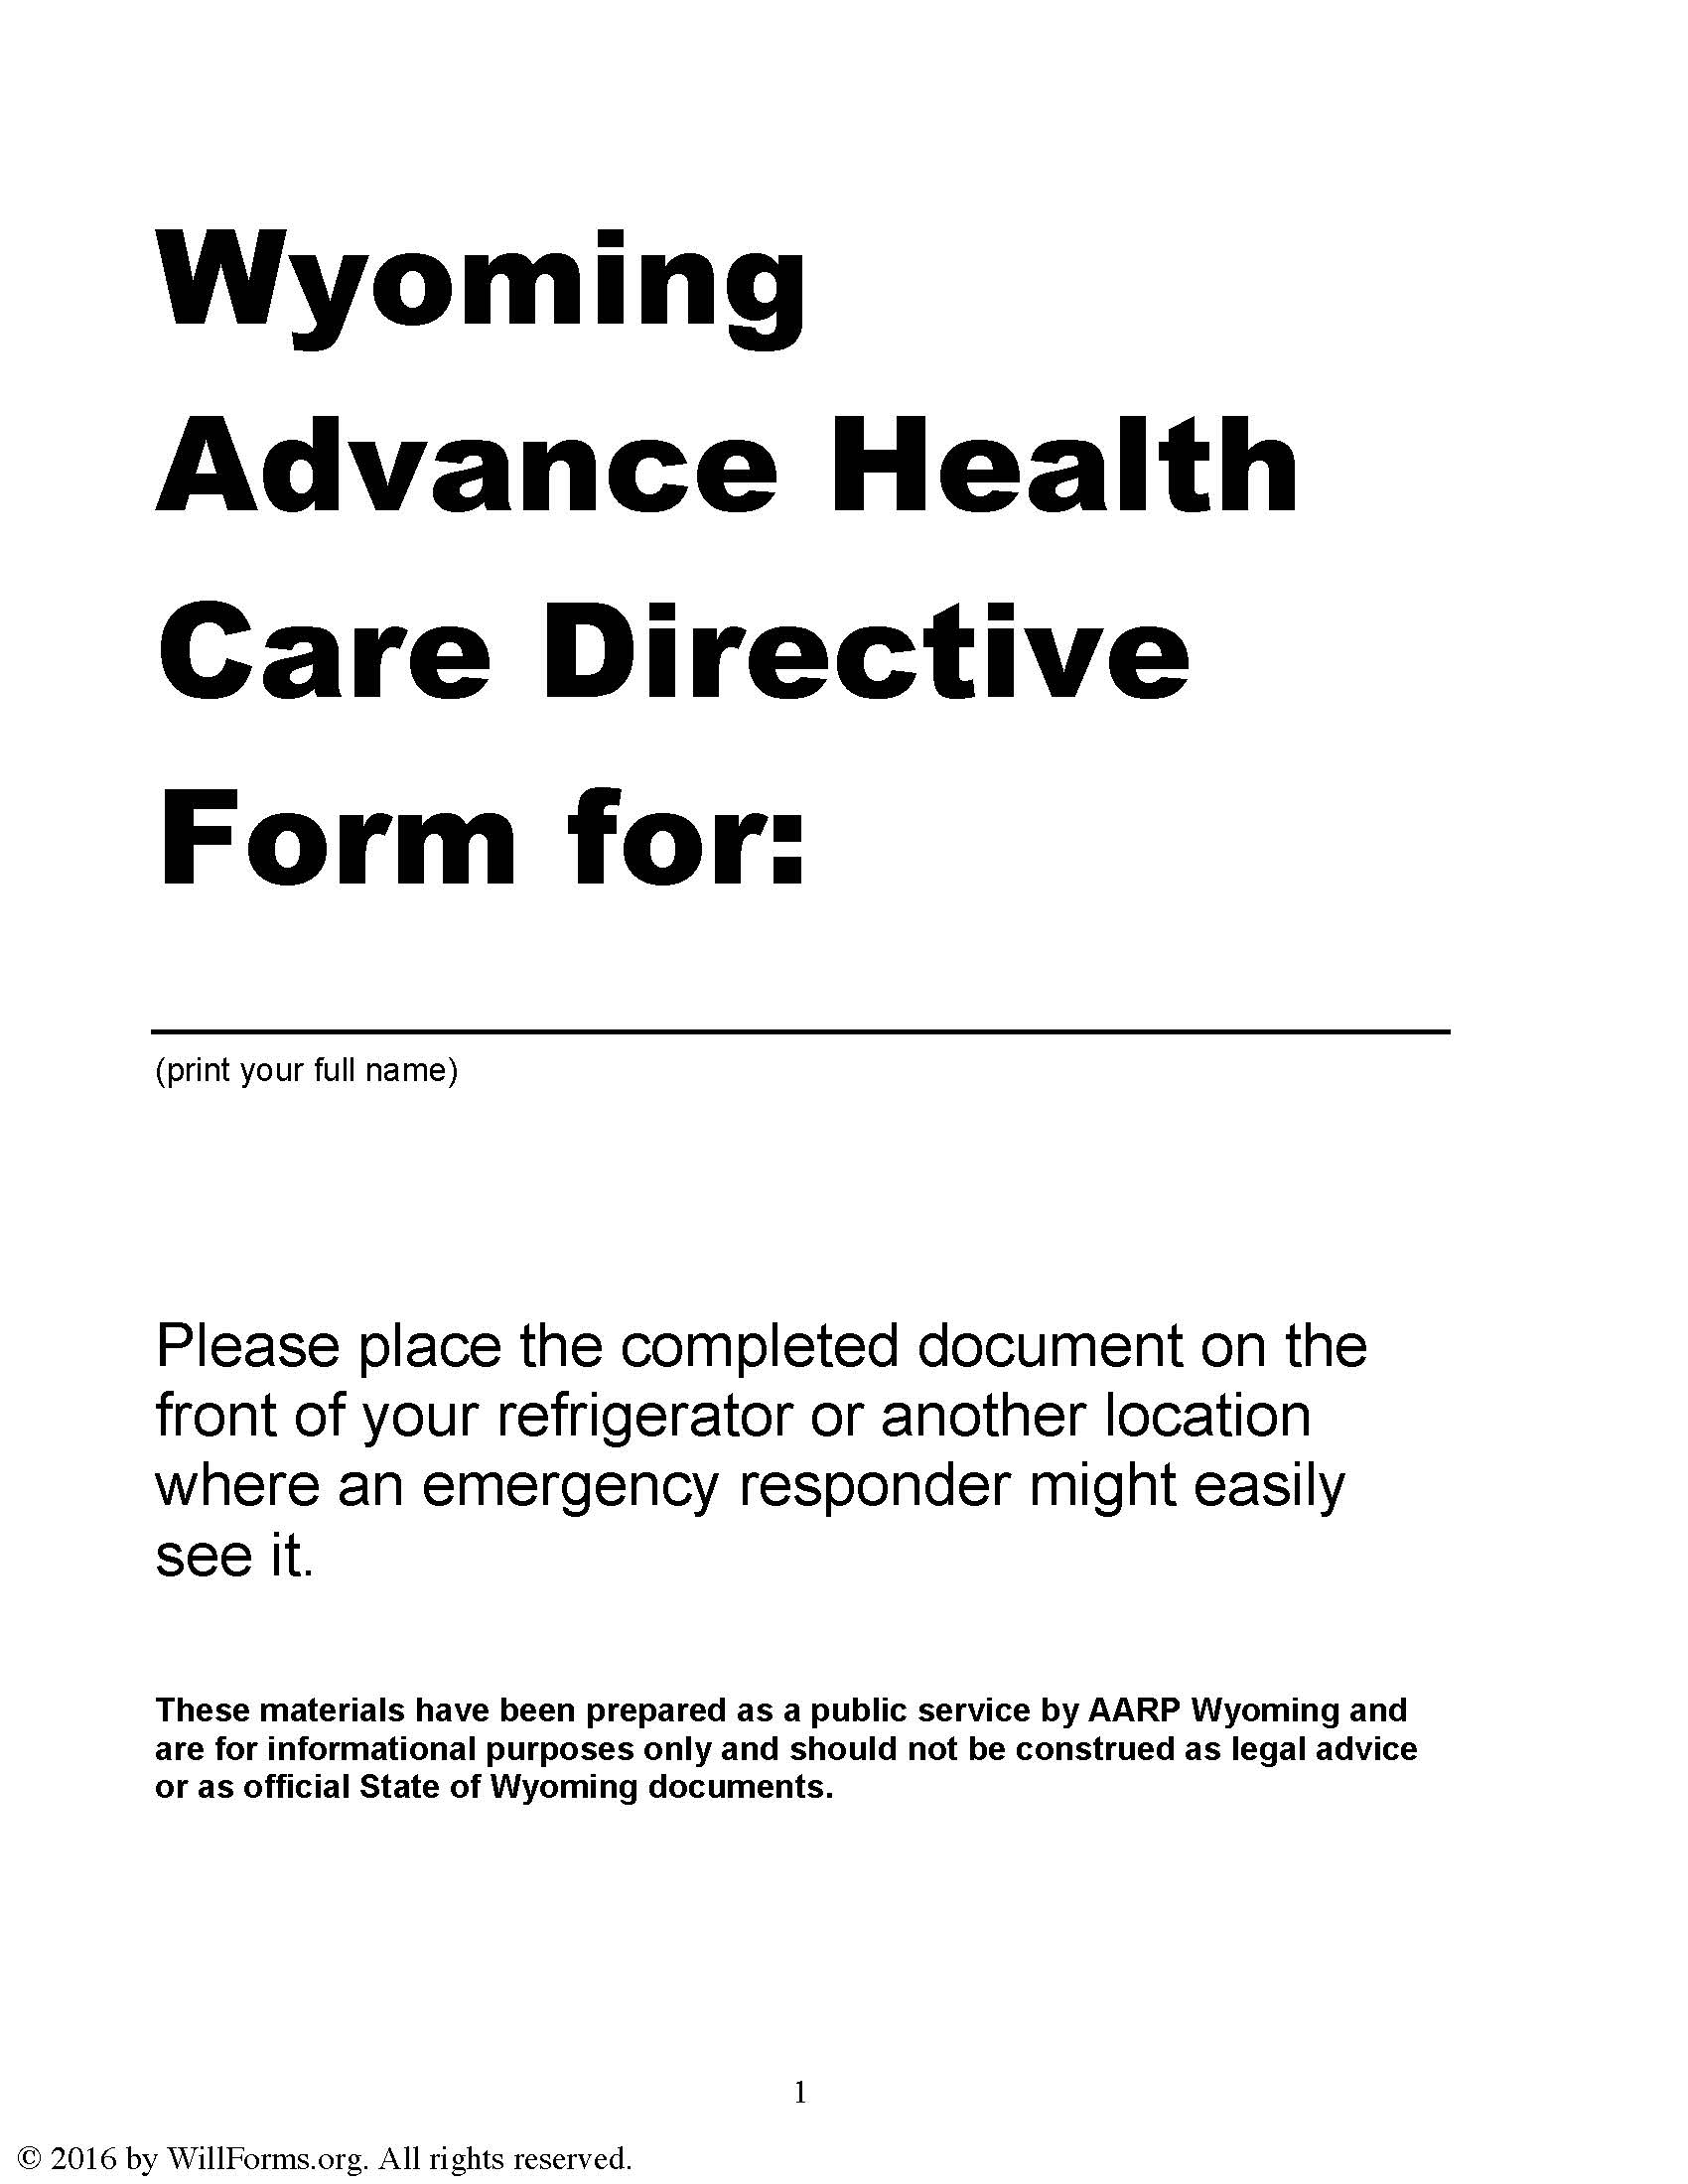 Wyoming Advance Health Care Directive(Living Will) Form